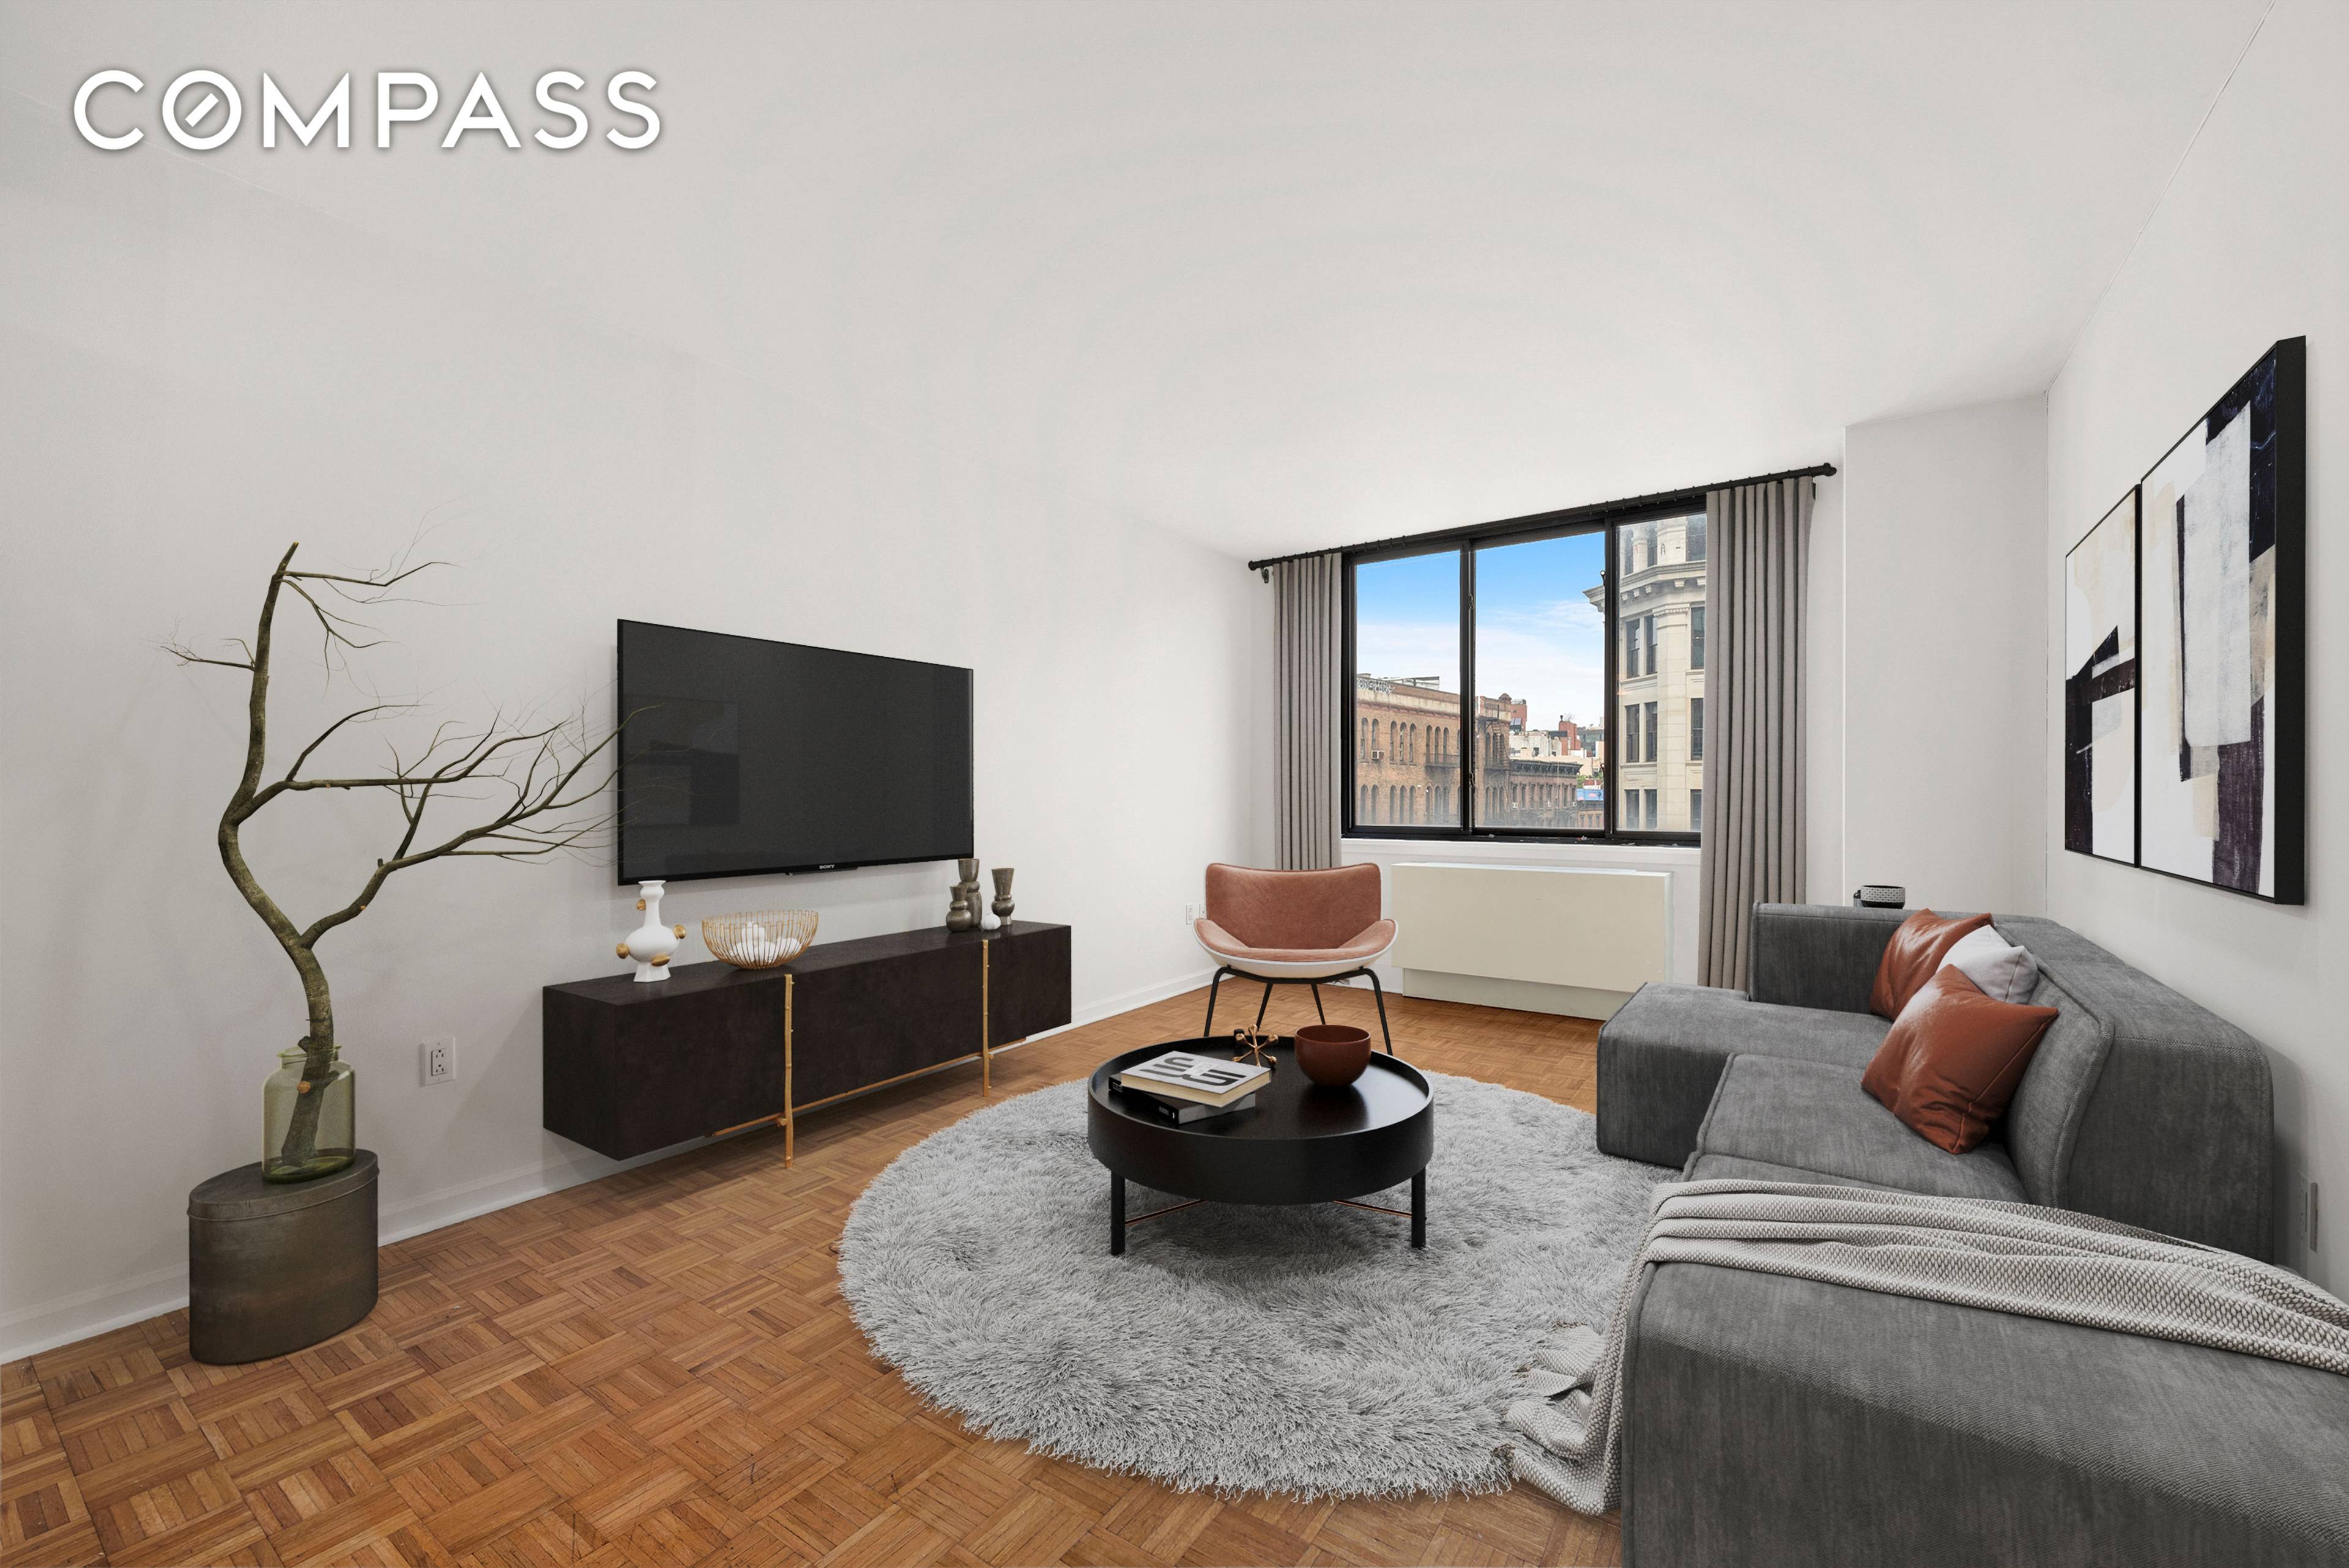 Welcome to Nolita Place Condominiums, a boutique condo building perfectly situated at the crossroads of Nolita, the Lower East Side and the East Village.